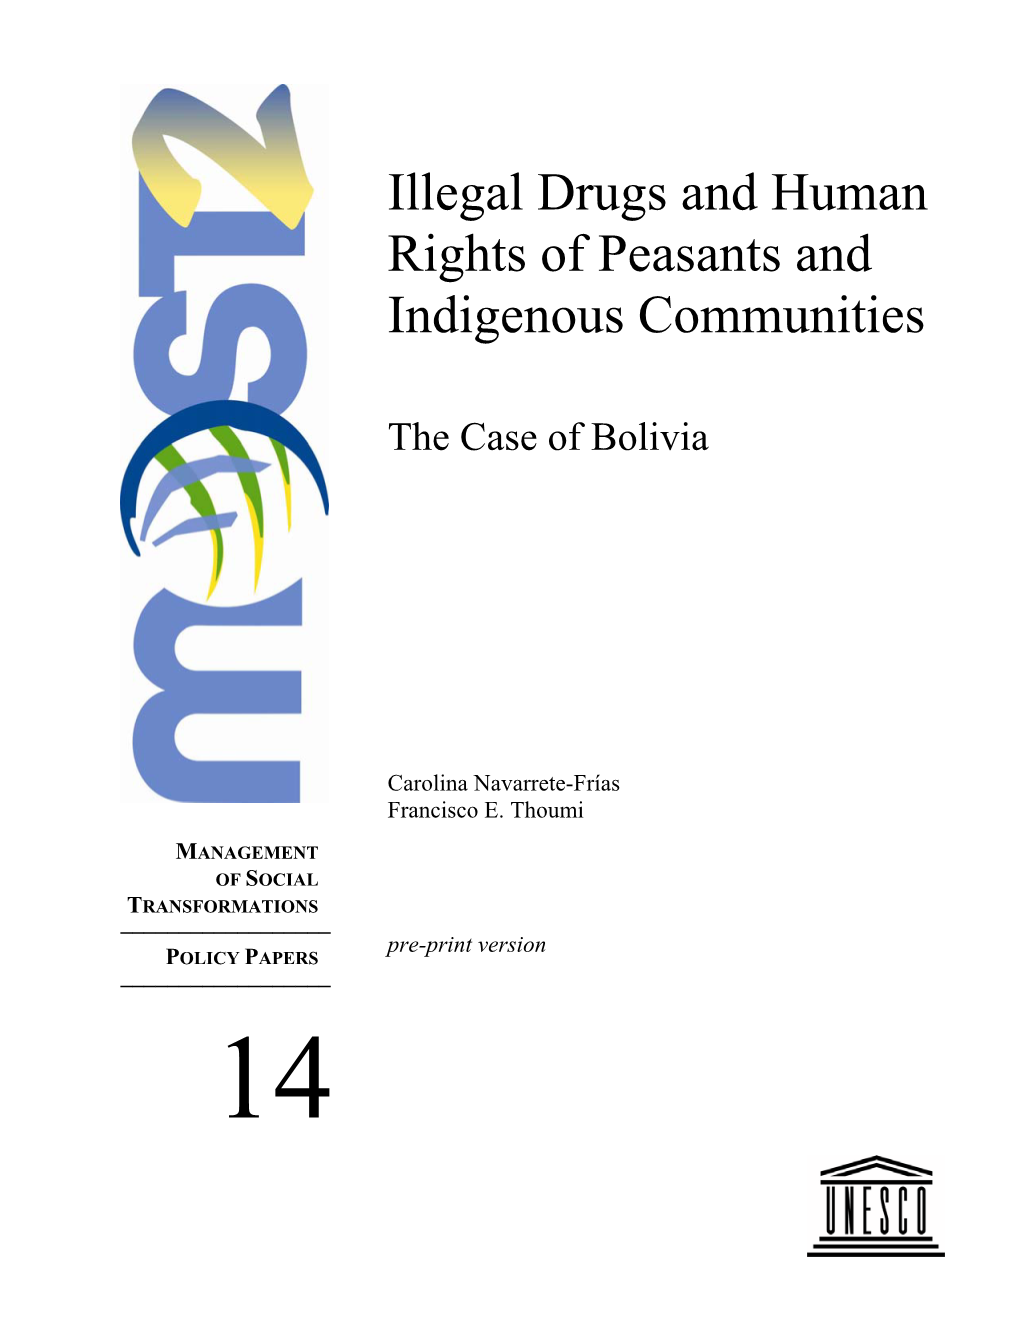 Illegal Drugs and Human Rights of Peasants and Indigenous Communities